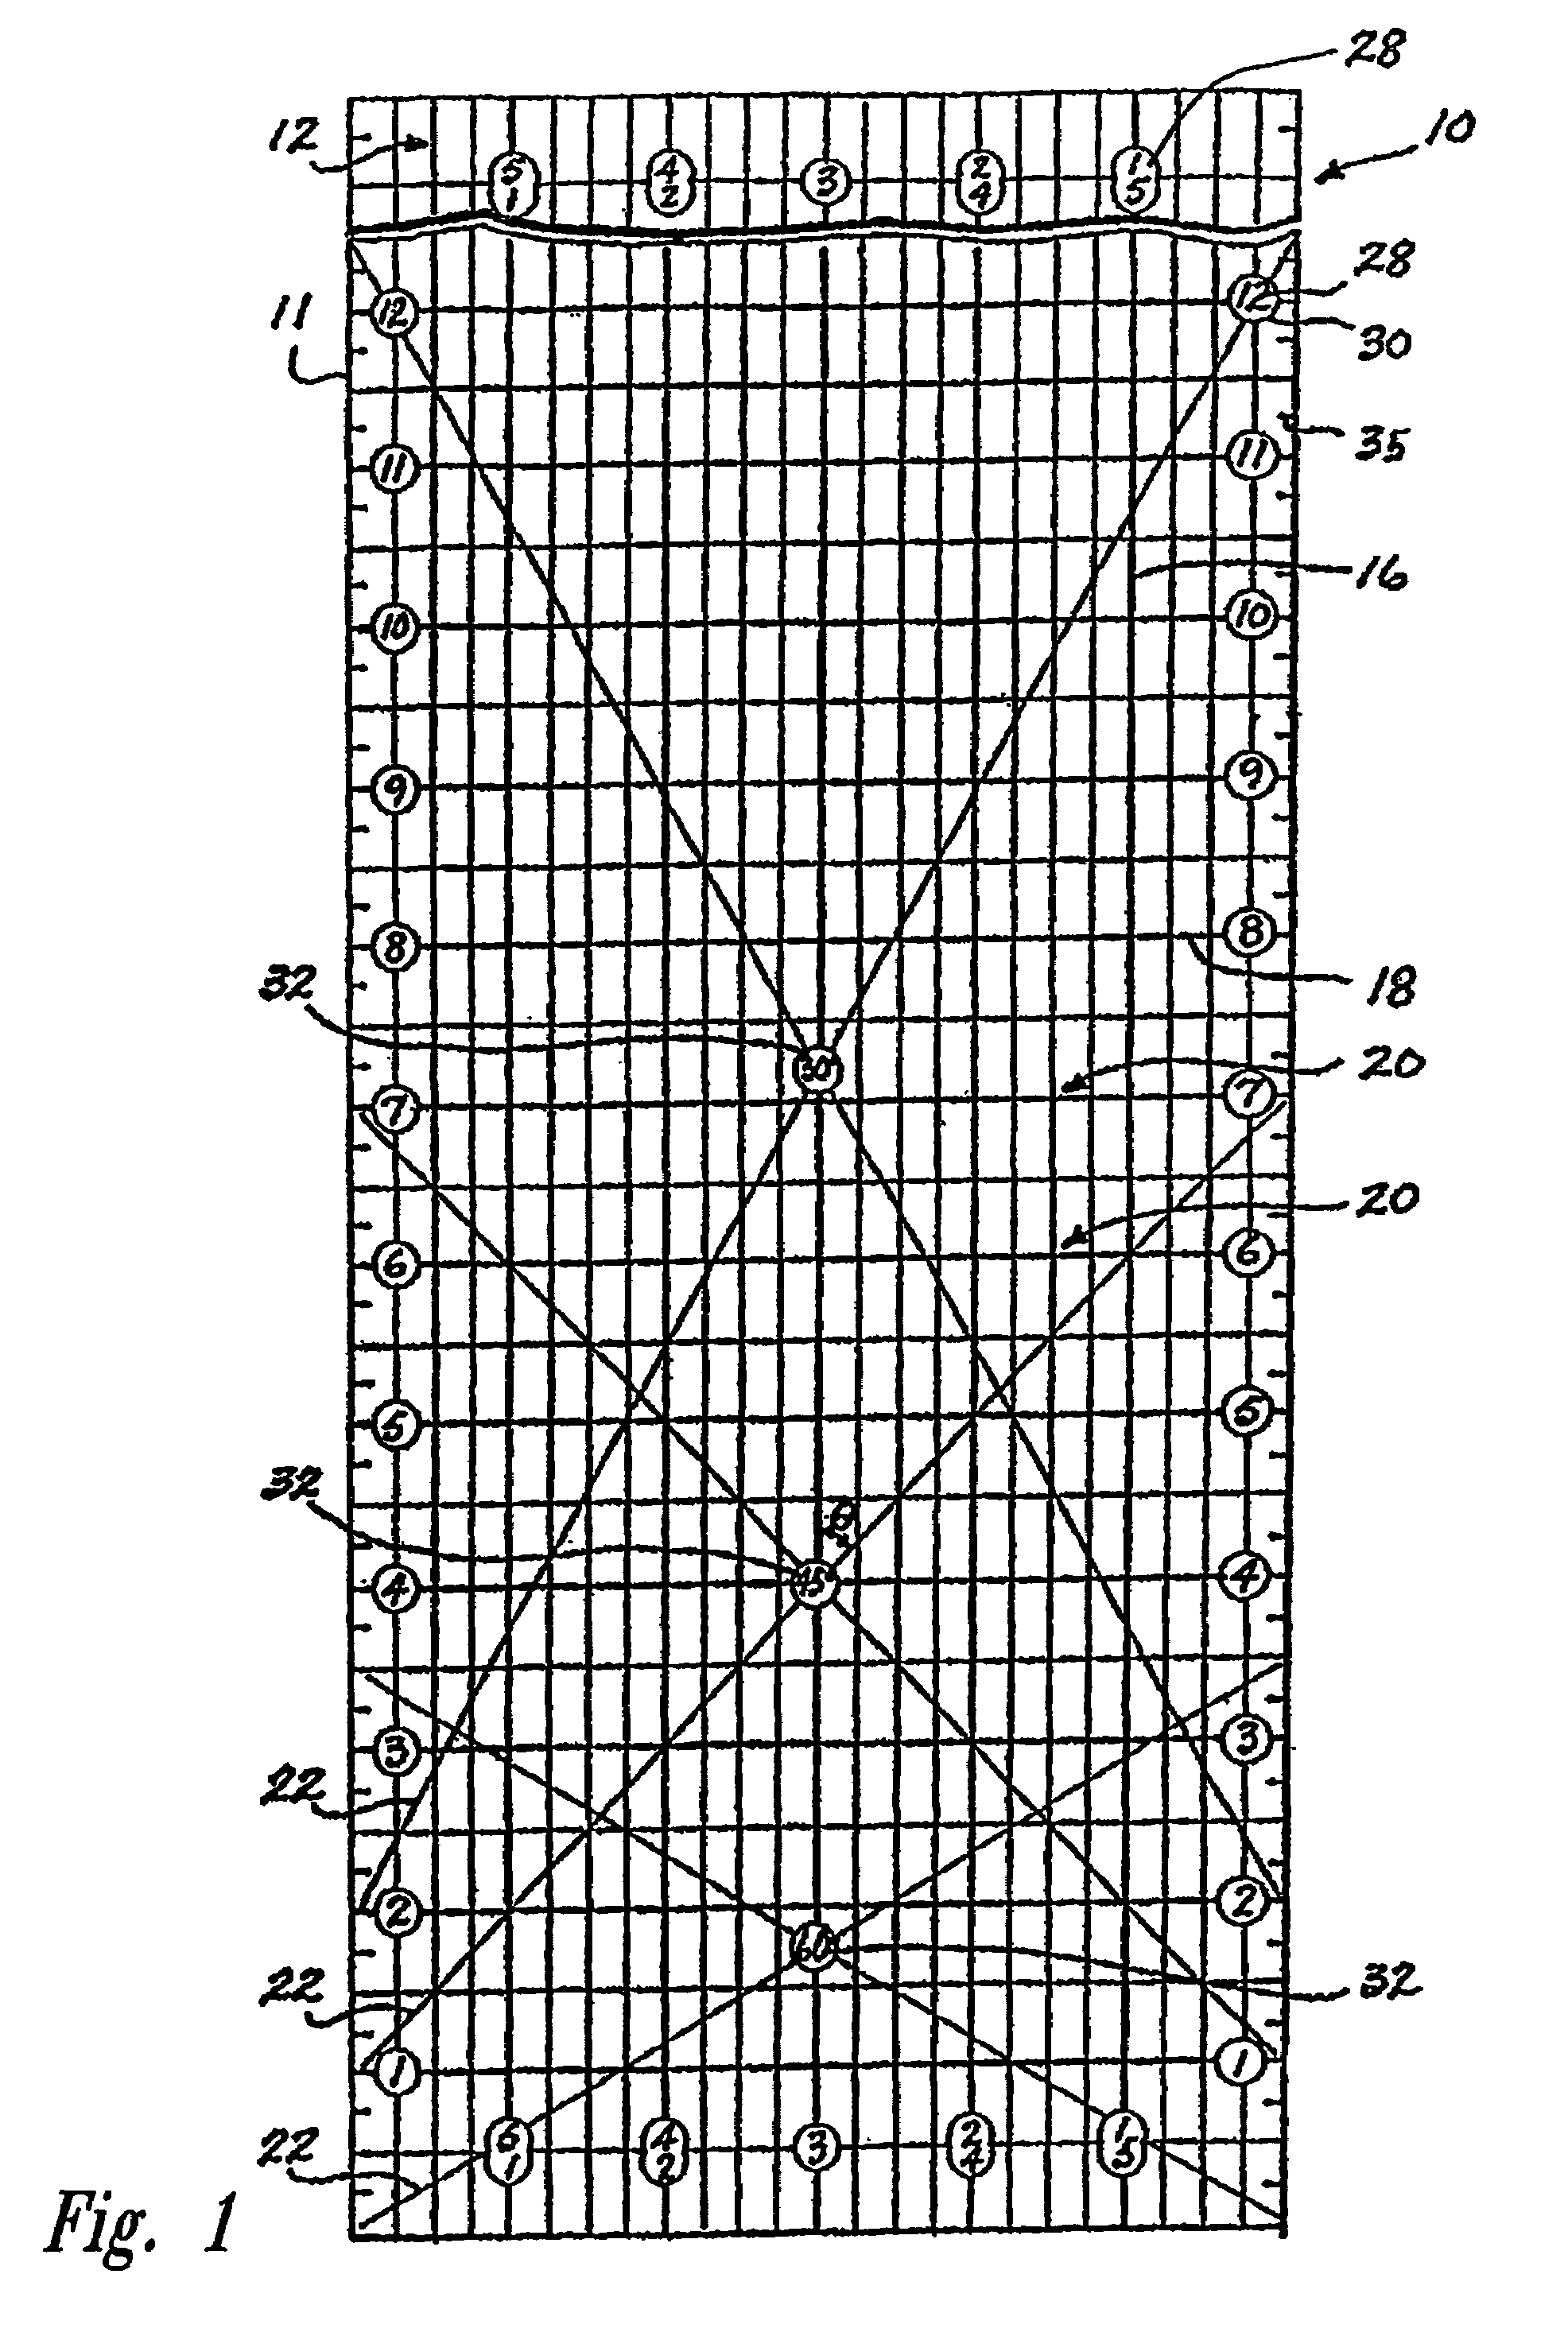 Non-slip measuring tool and method of making